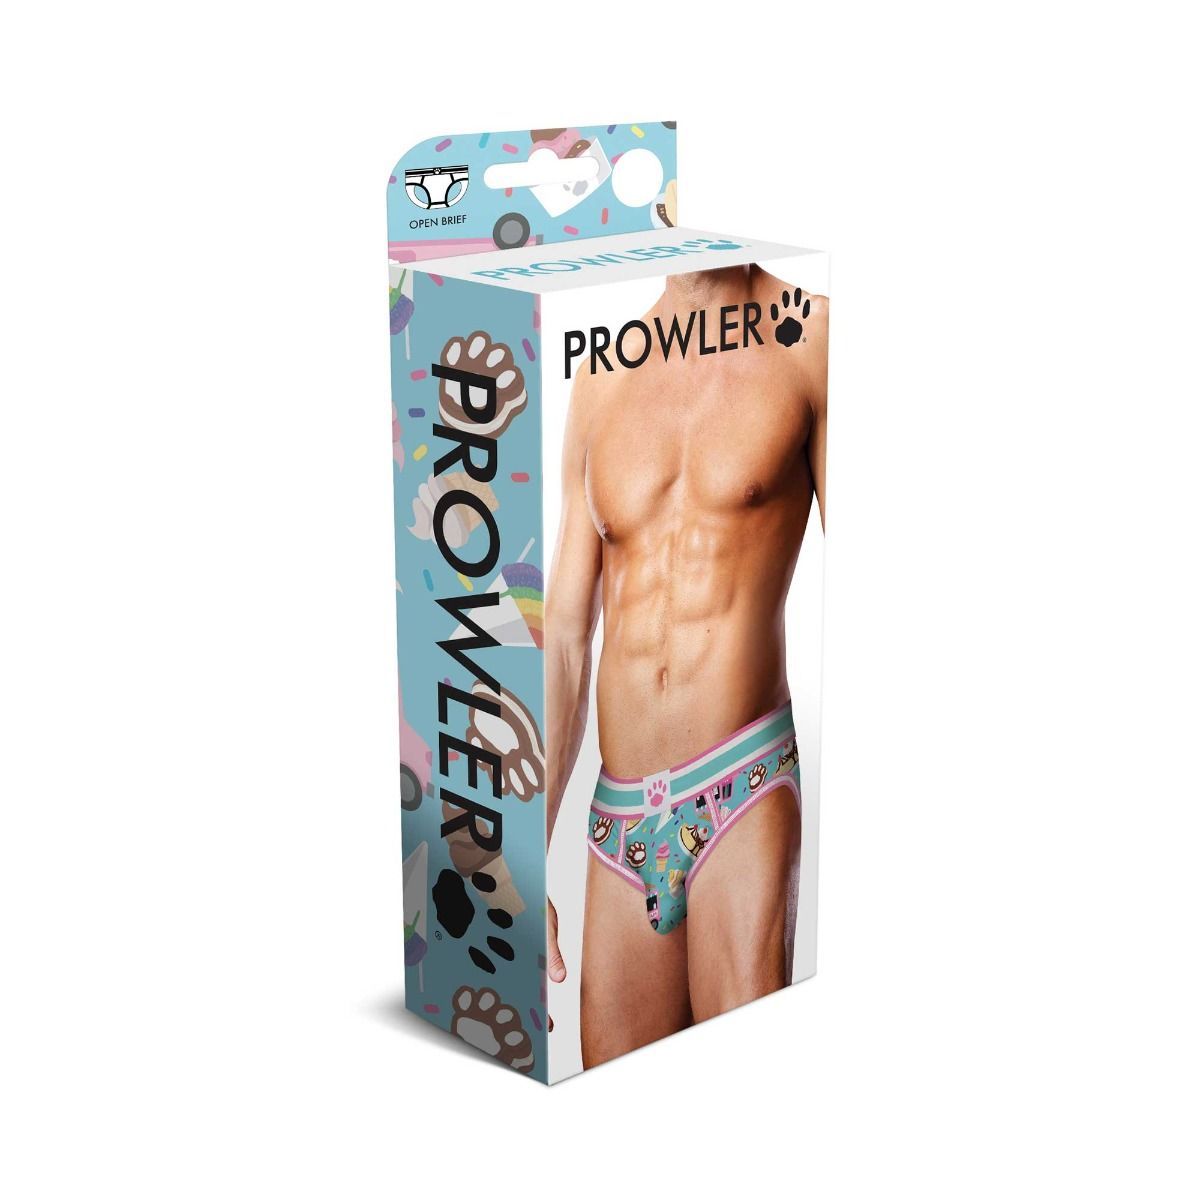 Prowler Sundae Open Brief - One Stop Adult Shop